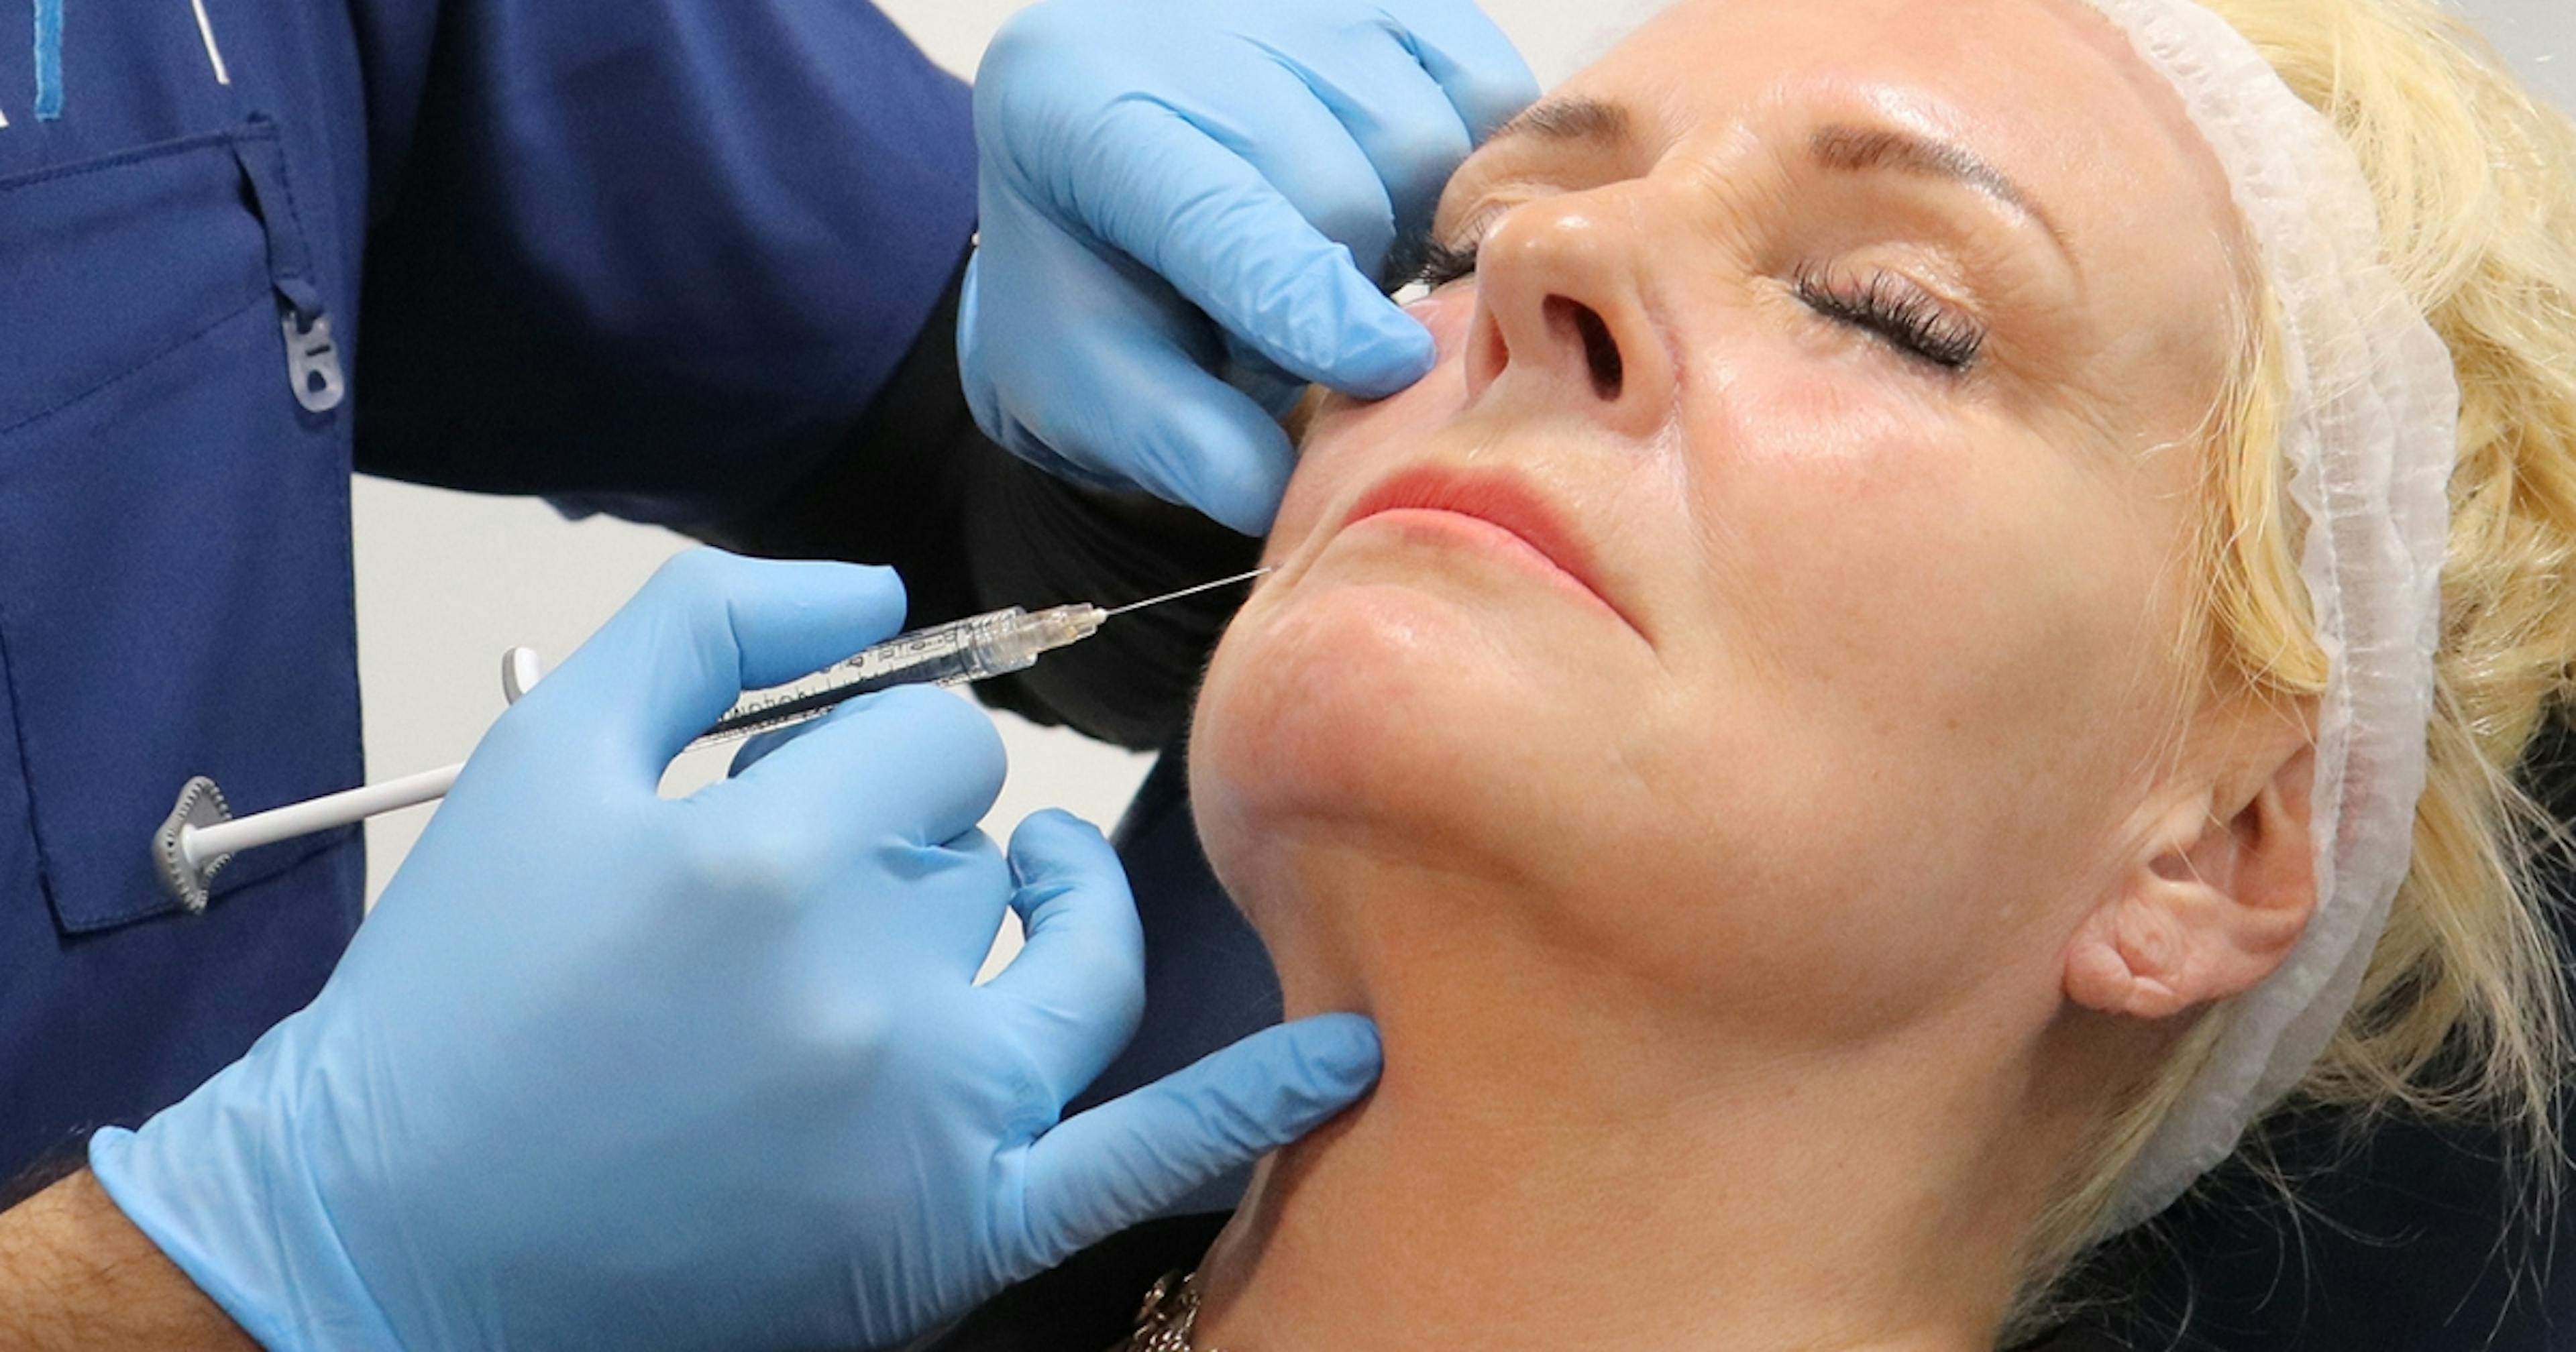 Learn How to Treat Nasolabial Folds with Filler at Harley Academy London